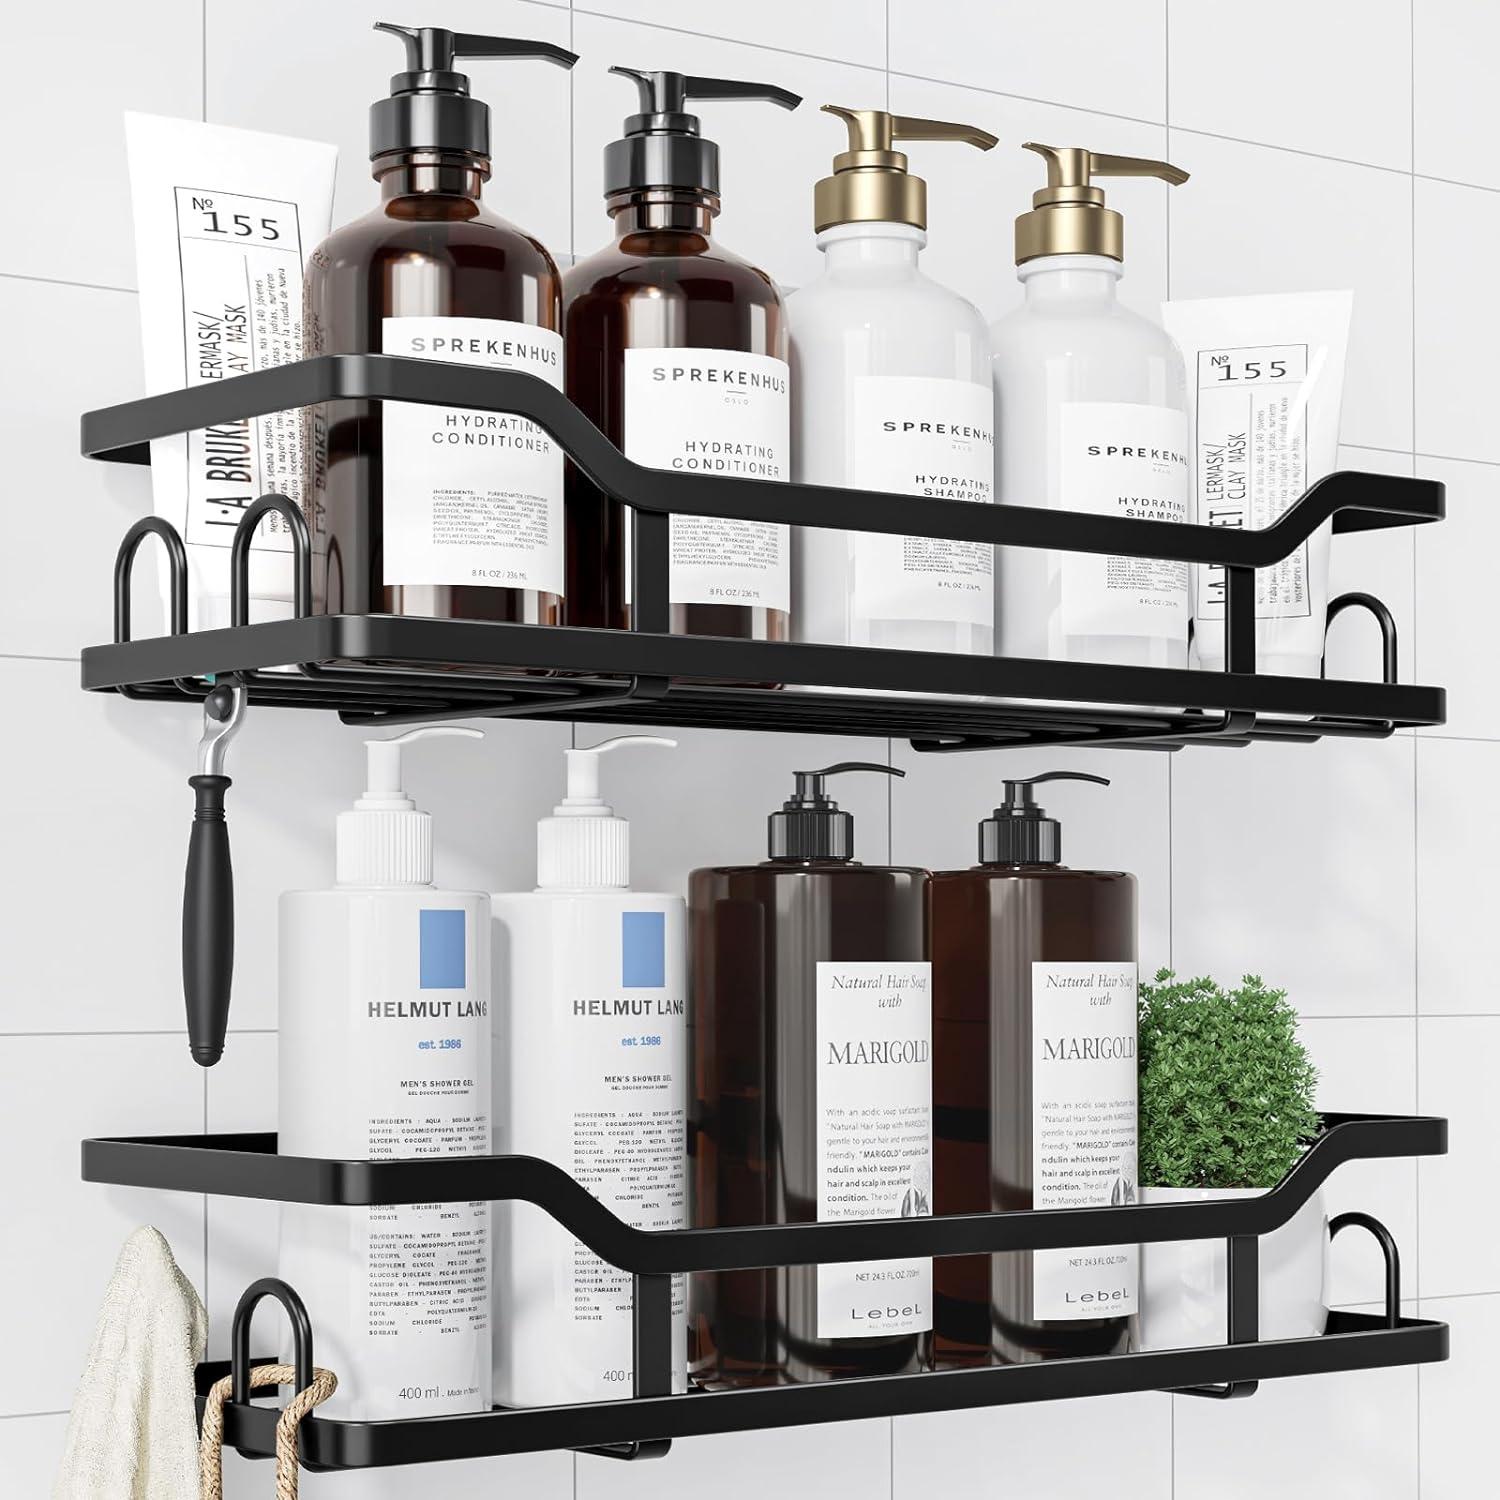 Kitsure Shower Caddy Extra Large - Adhesive Shower Organizer, Stainless Steel Shower Shelf for Inside Shower, No Drill Bathroom Organizers and Storage, Home Decor Accessories, 2 Pack, Black